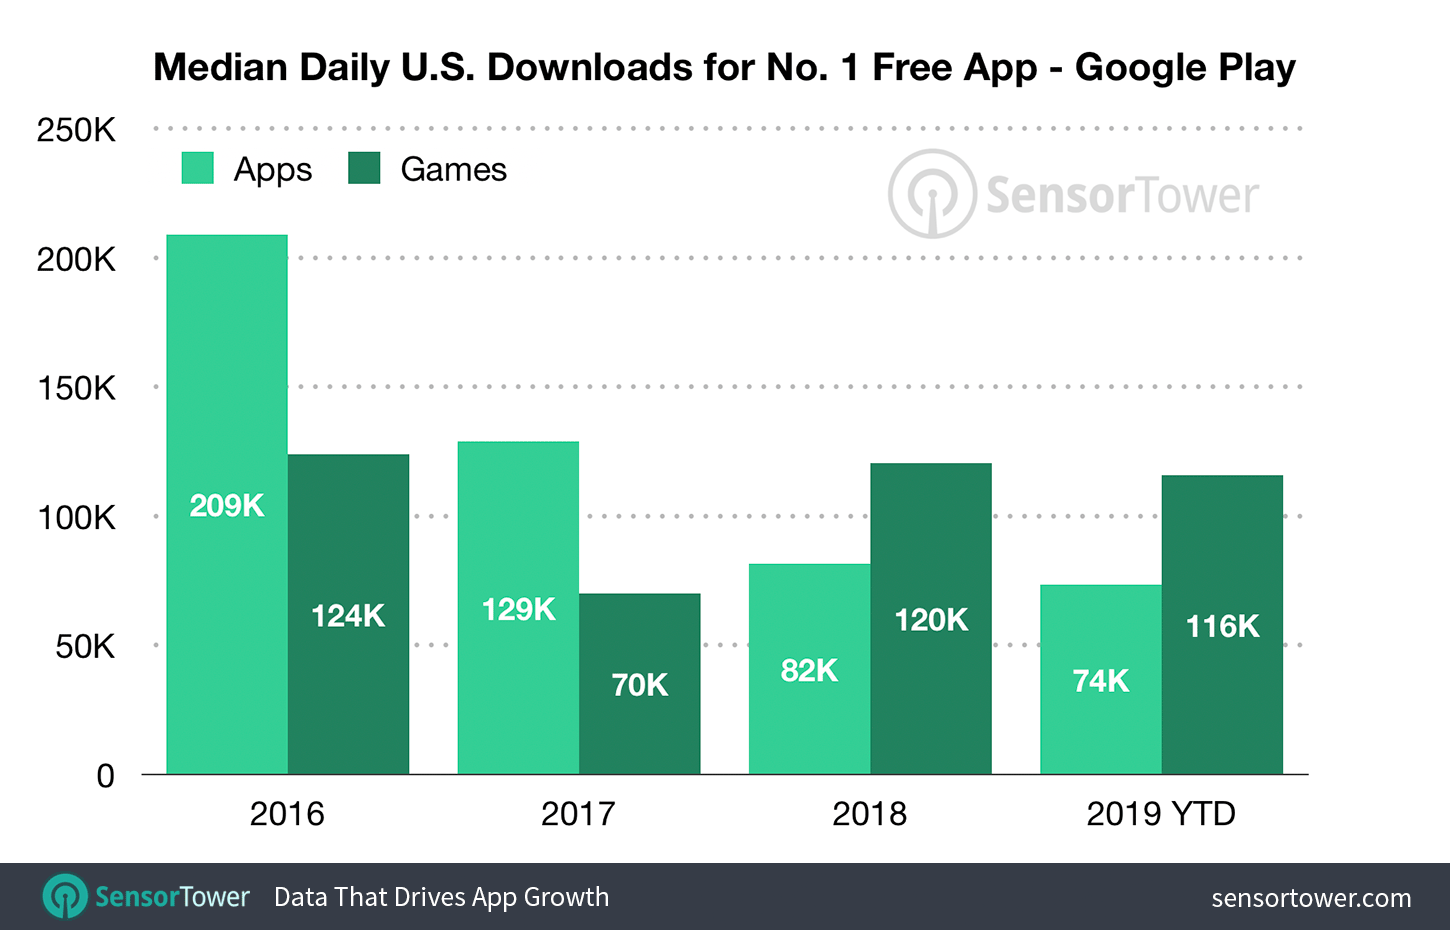 Median Downloads to Reach Number One on the U.S. Google Play Store - First-Half 2019